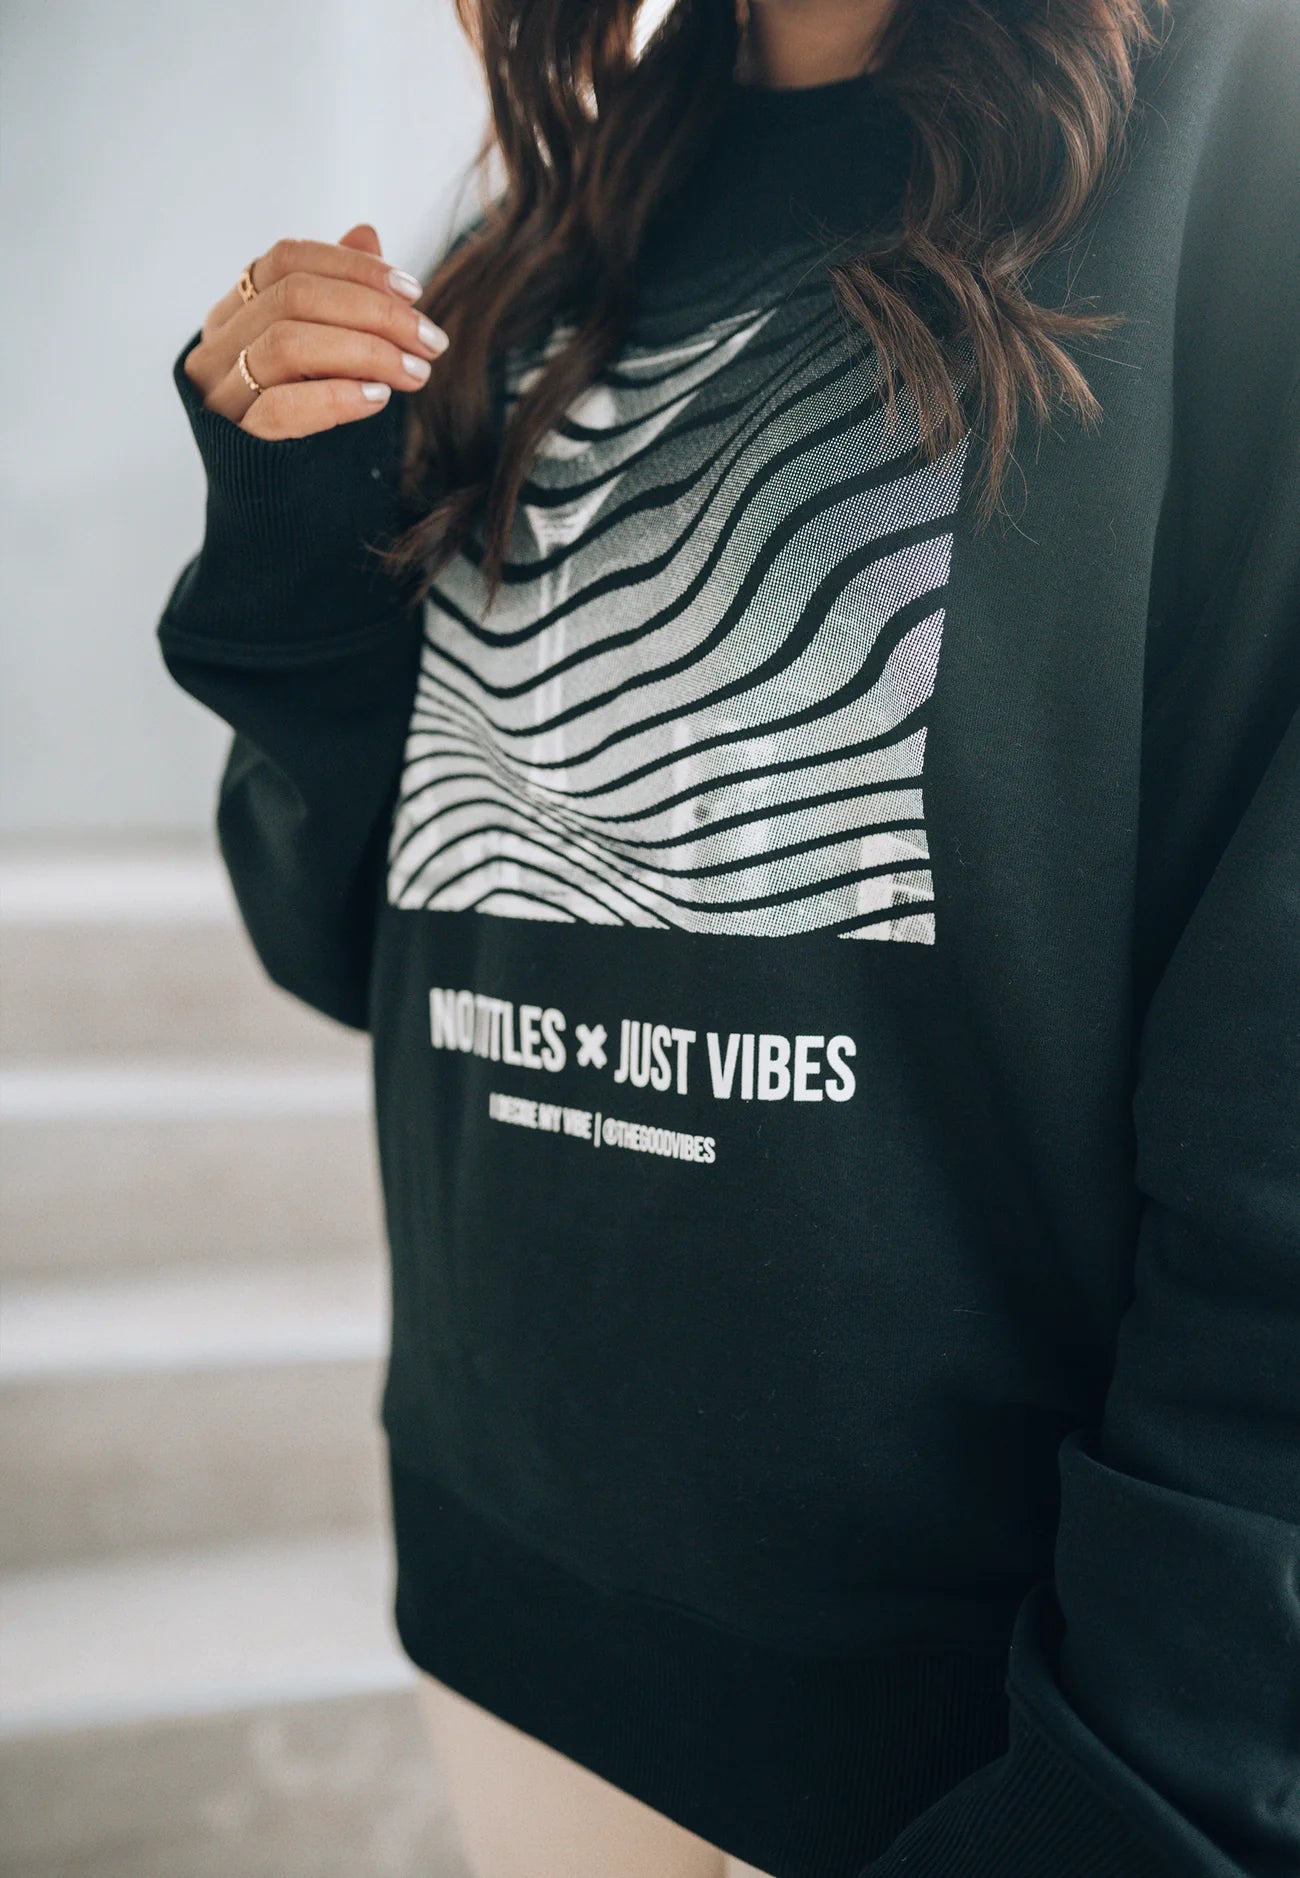 no titles, just vibes Sweater